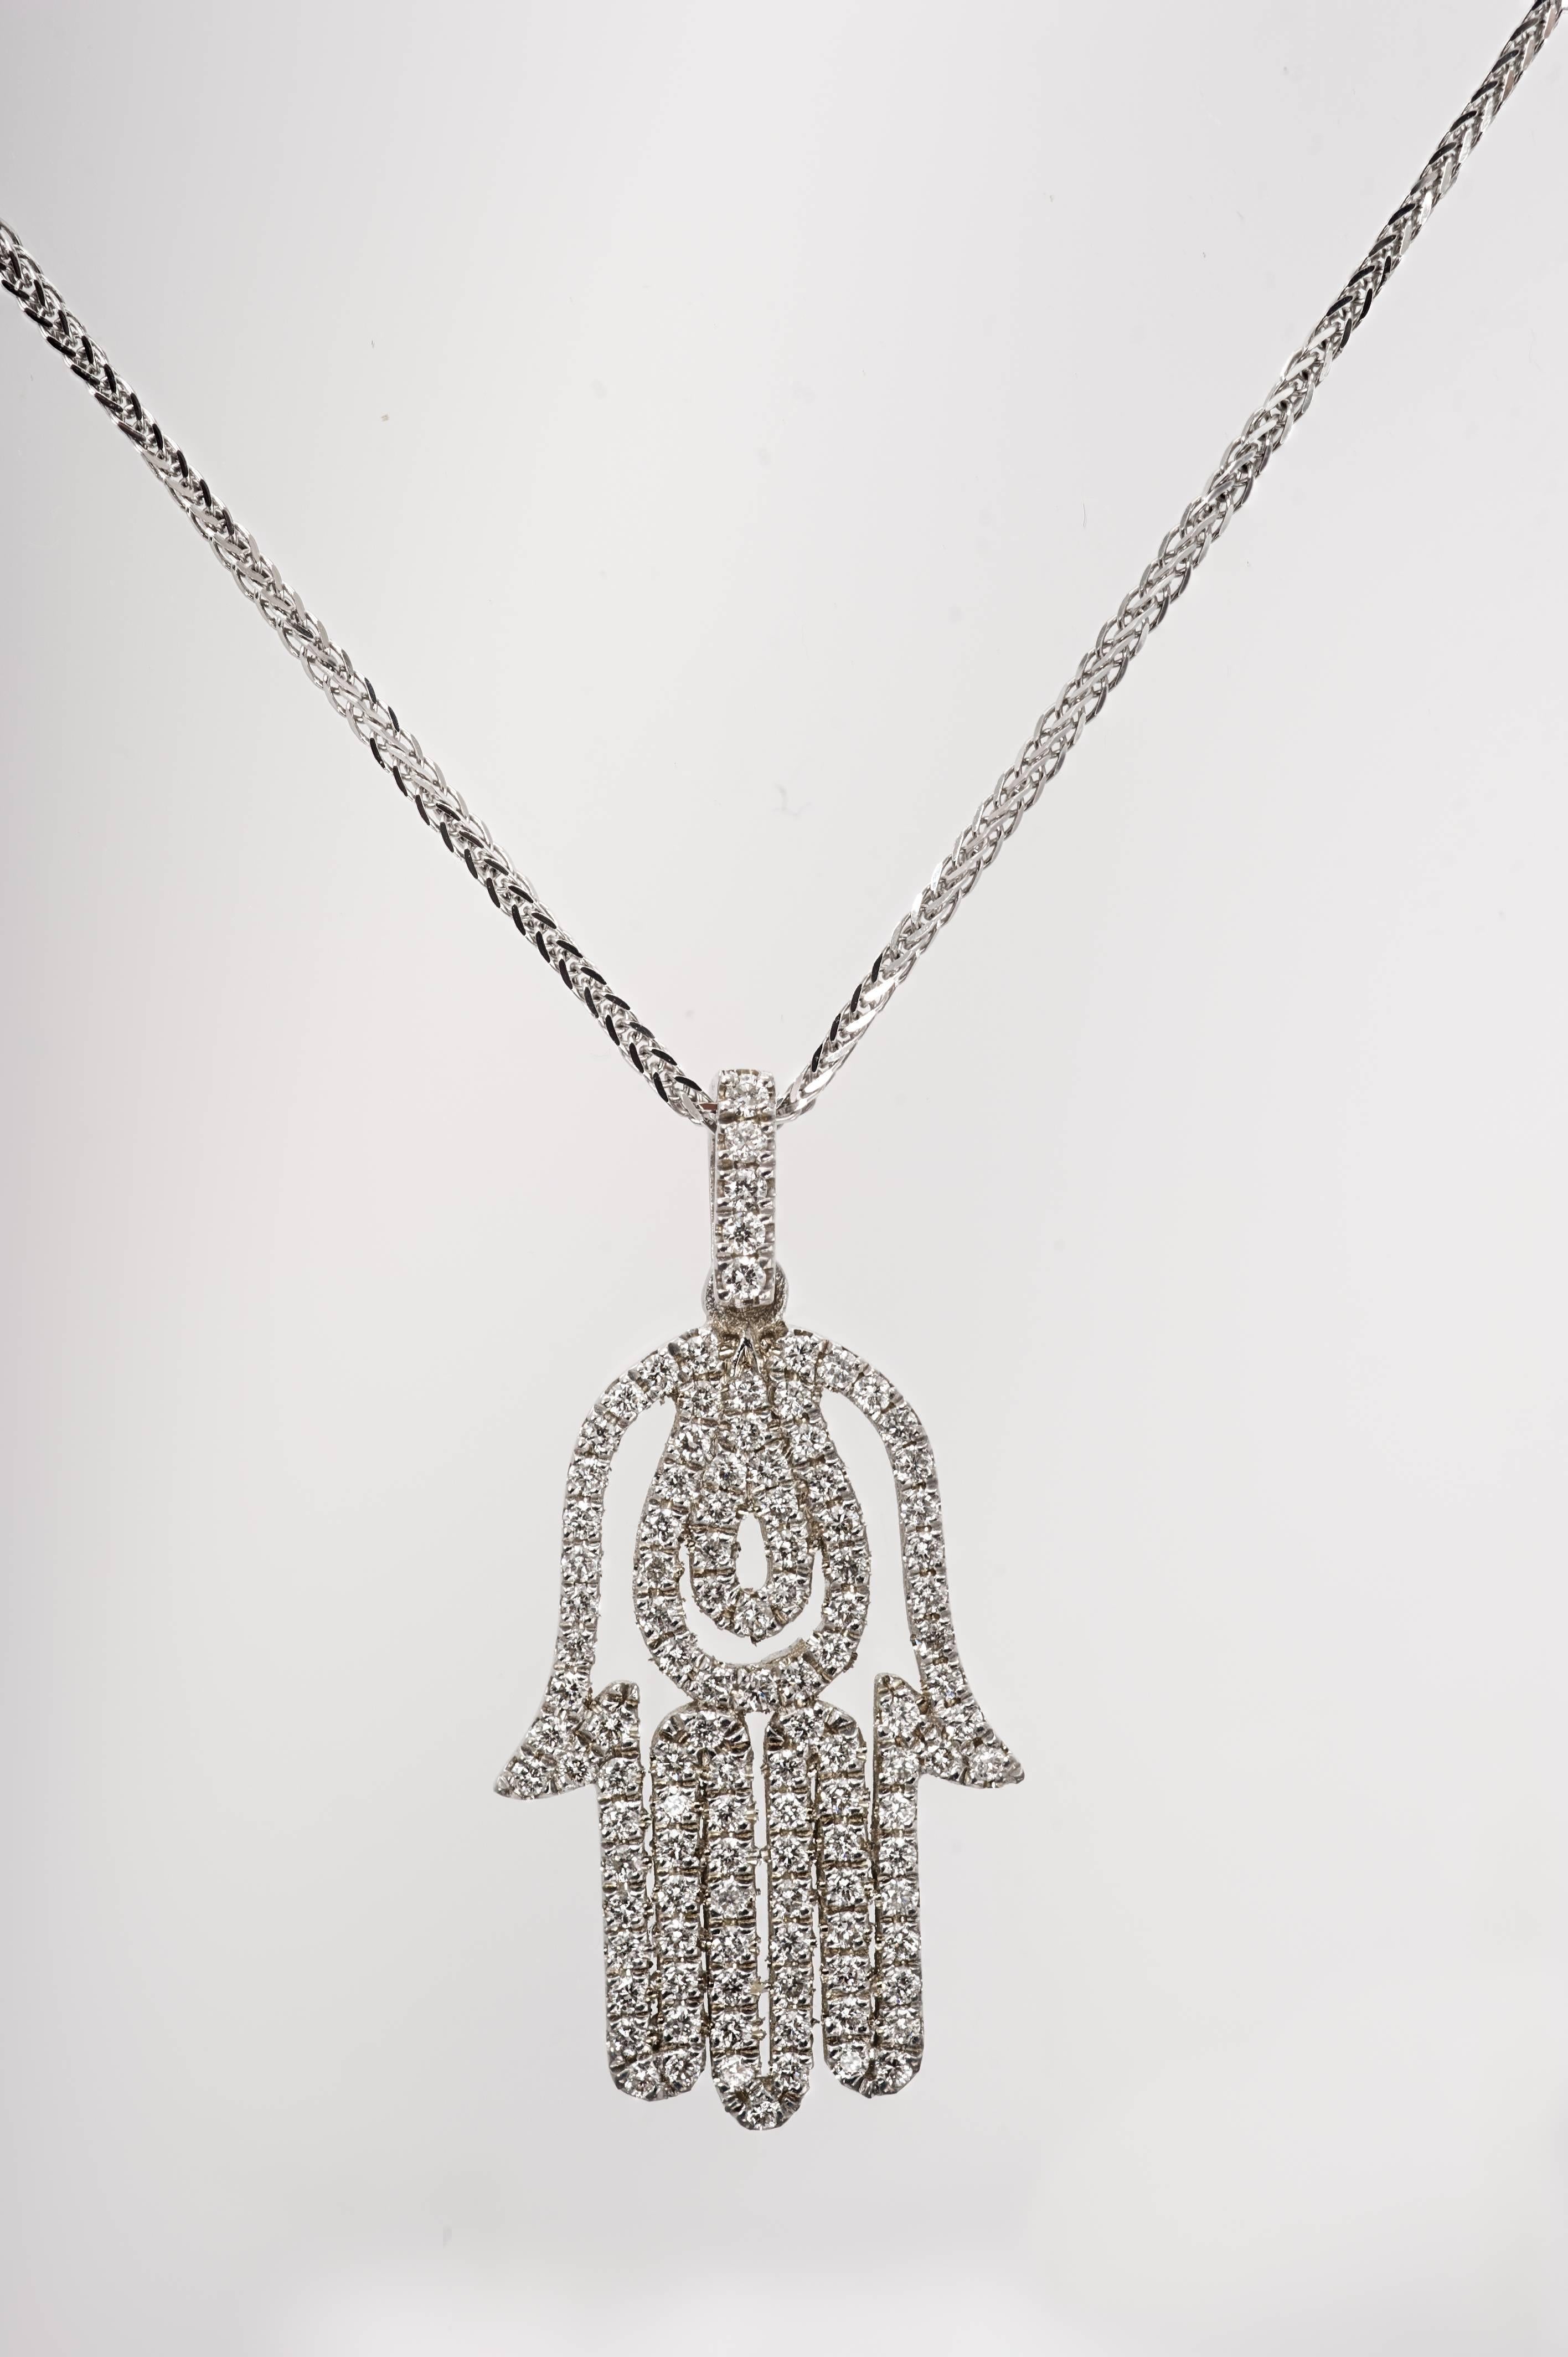 Hand made exquisite Hamsa Necklace pendant. This unique Pendent is set with 0.51 Total Carat high quality Diamonds  E VS. Mounted in 14K white gold. 
The Pendent comes with a  18 inches necklace 14 K white gold. 
Jewel Details: 
14 K White Gold